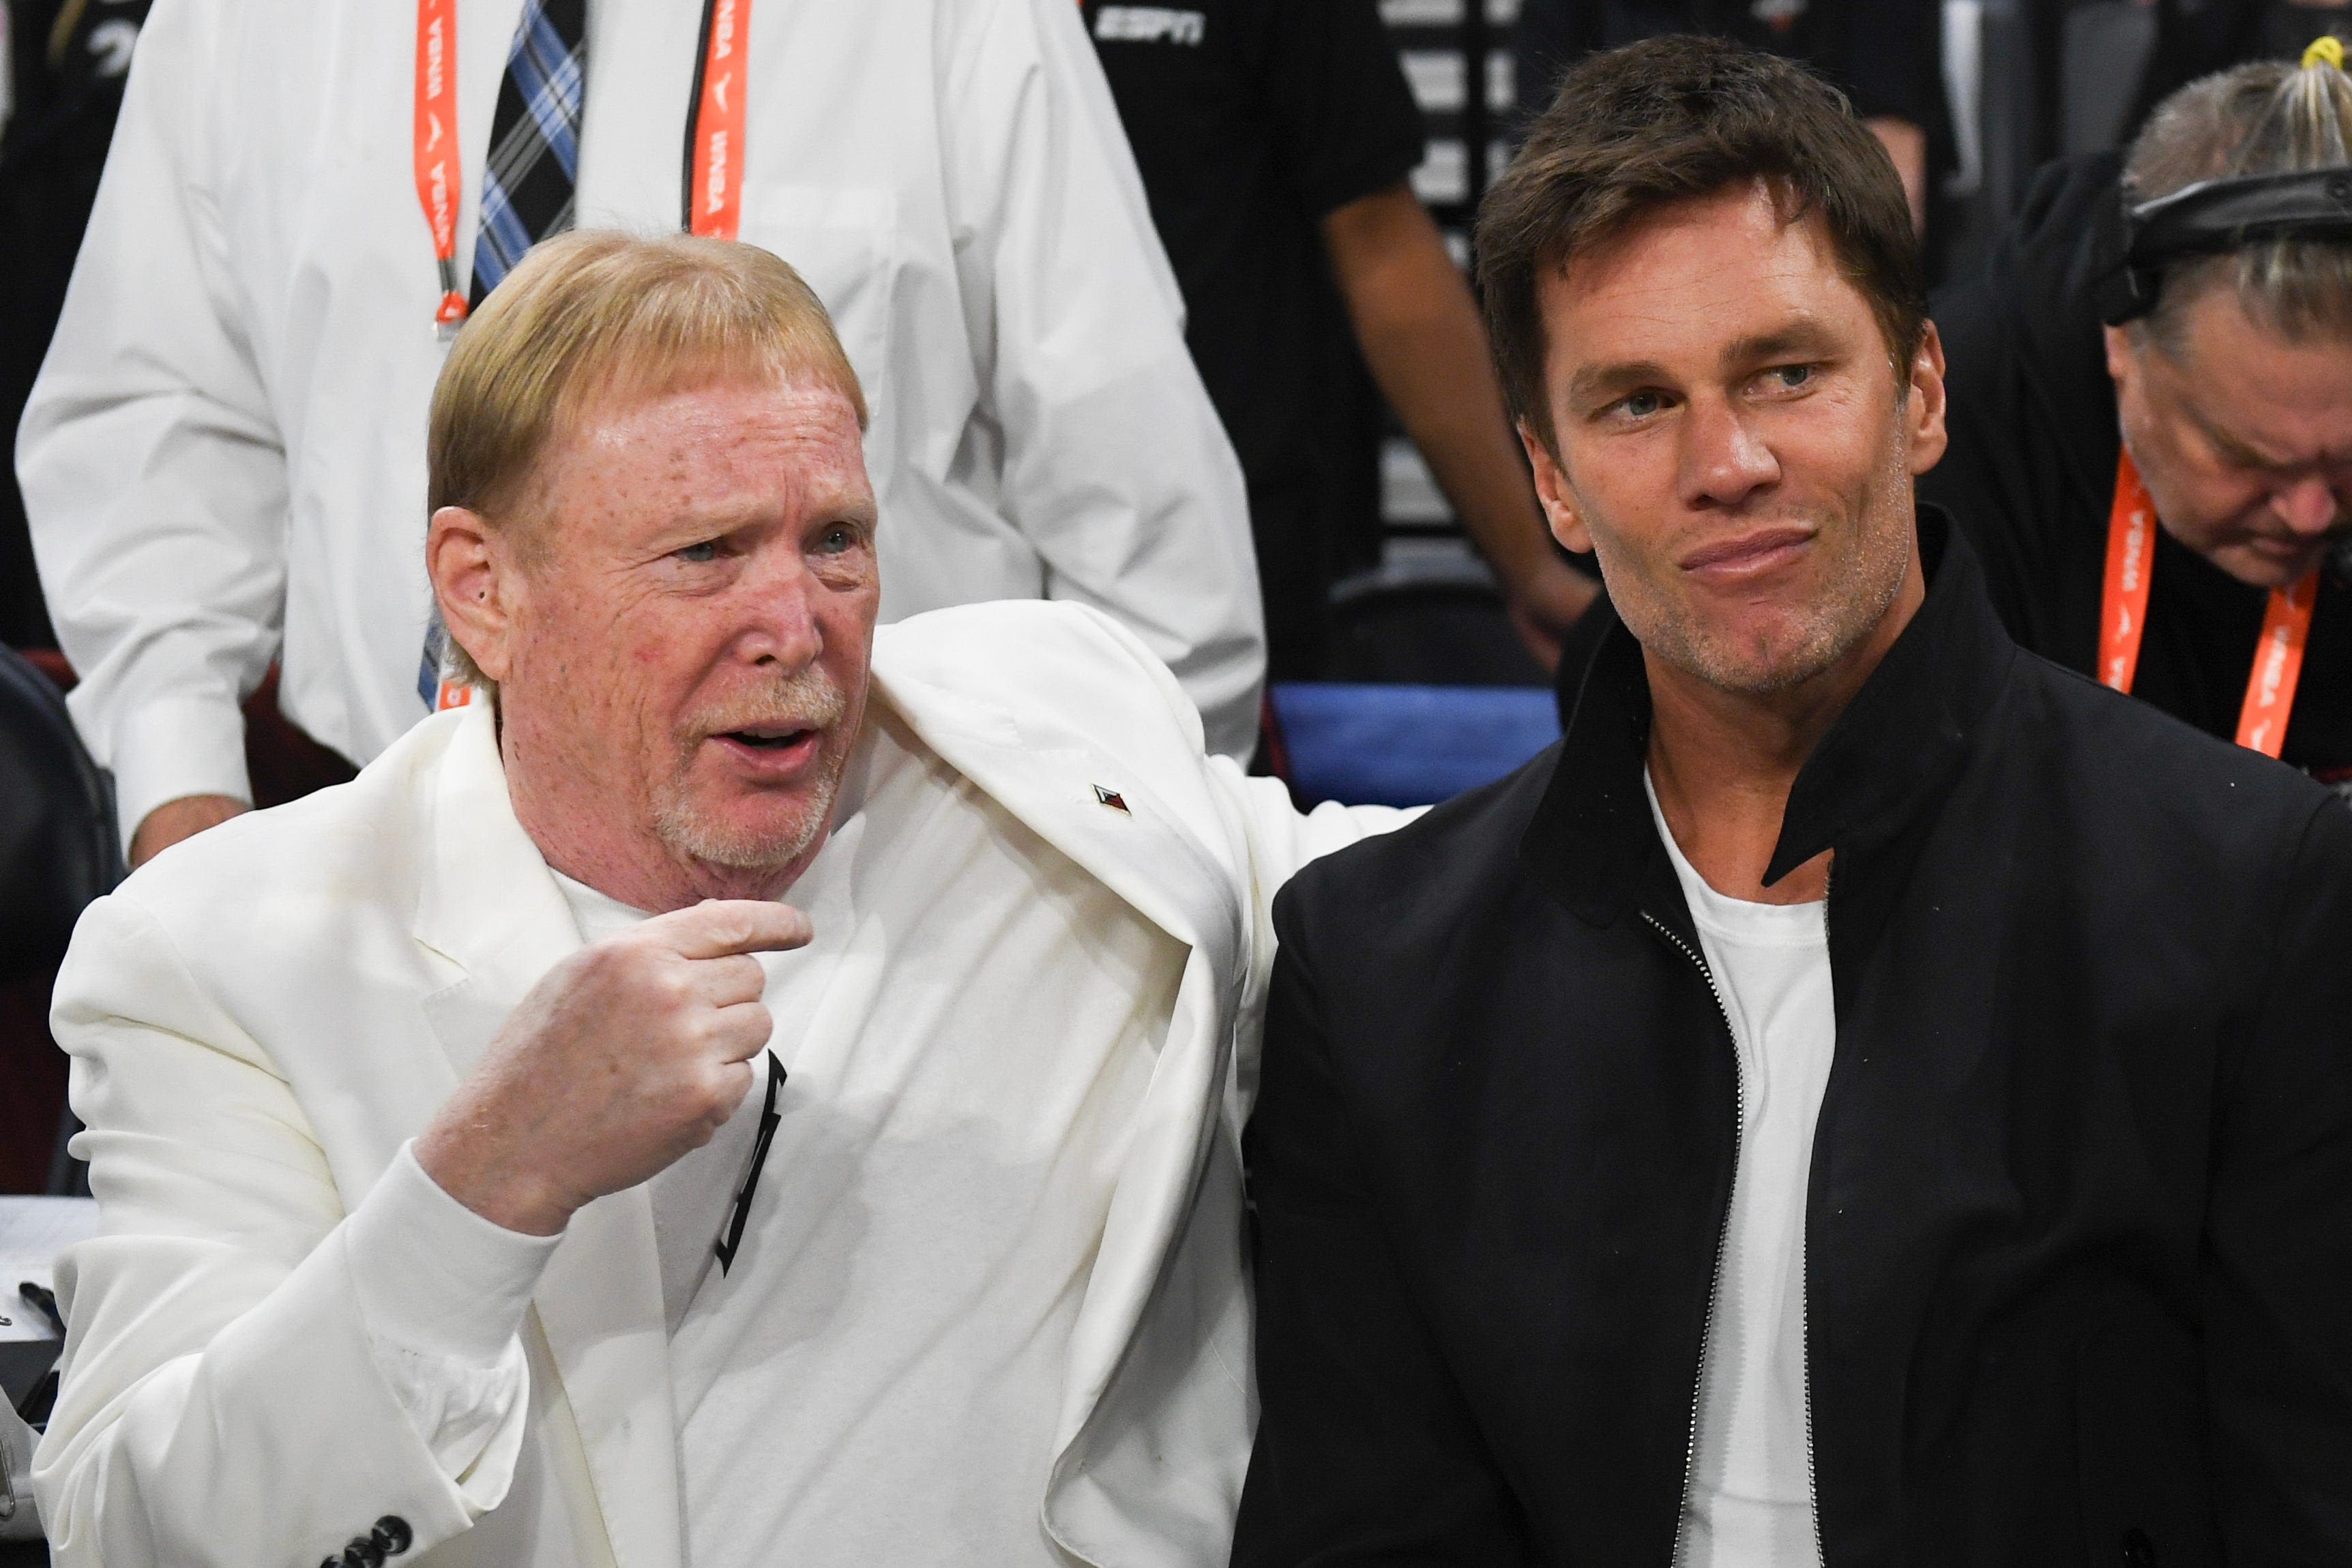 Will Tom Brady ever become part-owner of the Raiders? Even for an icon, money talks.